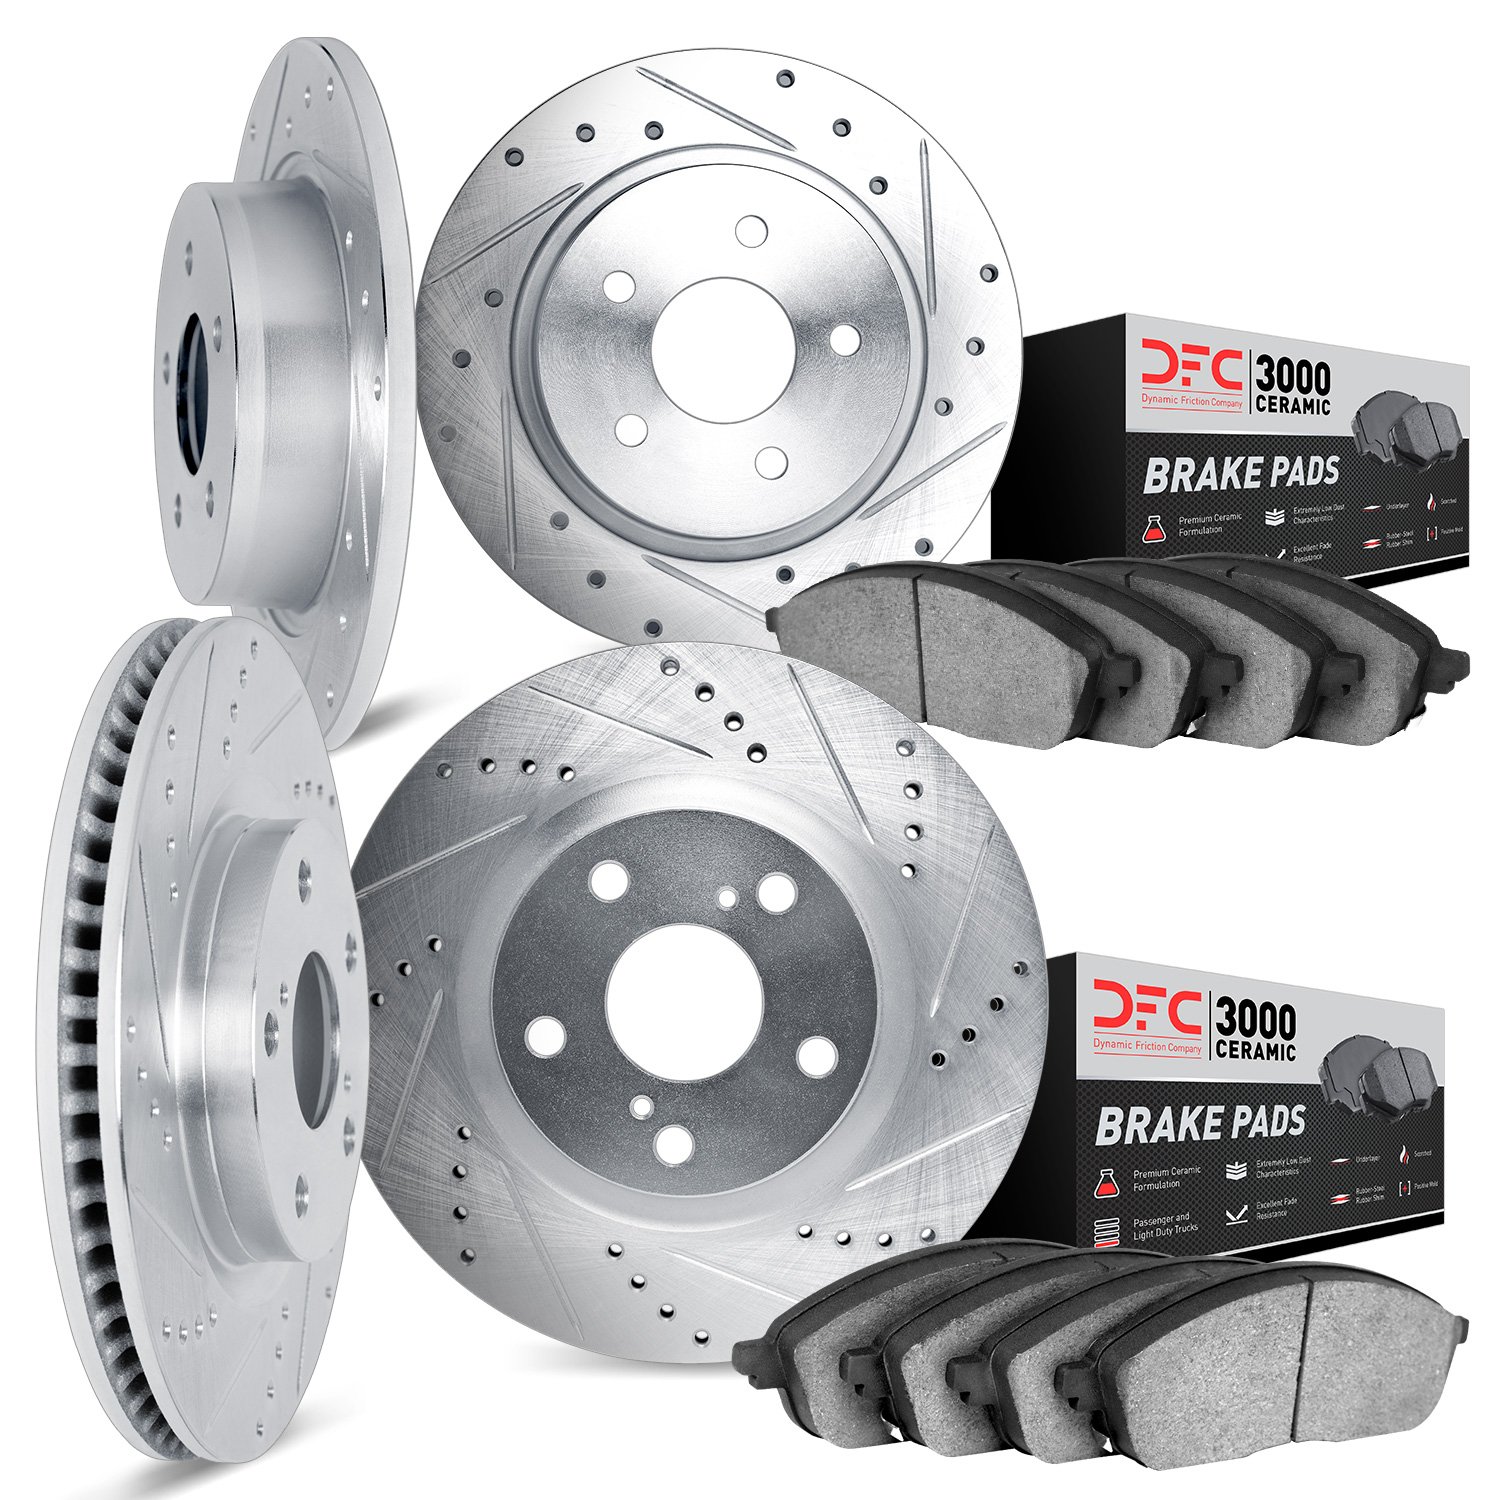 7304-56013 Drilled/Slotted Brake Rotor with 3000-Series Ceramic Brake Pads Kit [Silver], 1995-1995 Ford/Lincoln/Mercury/Mazda, P